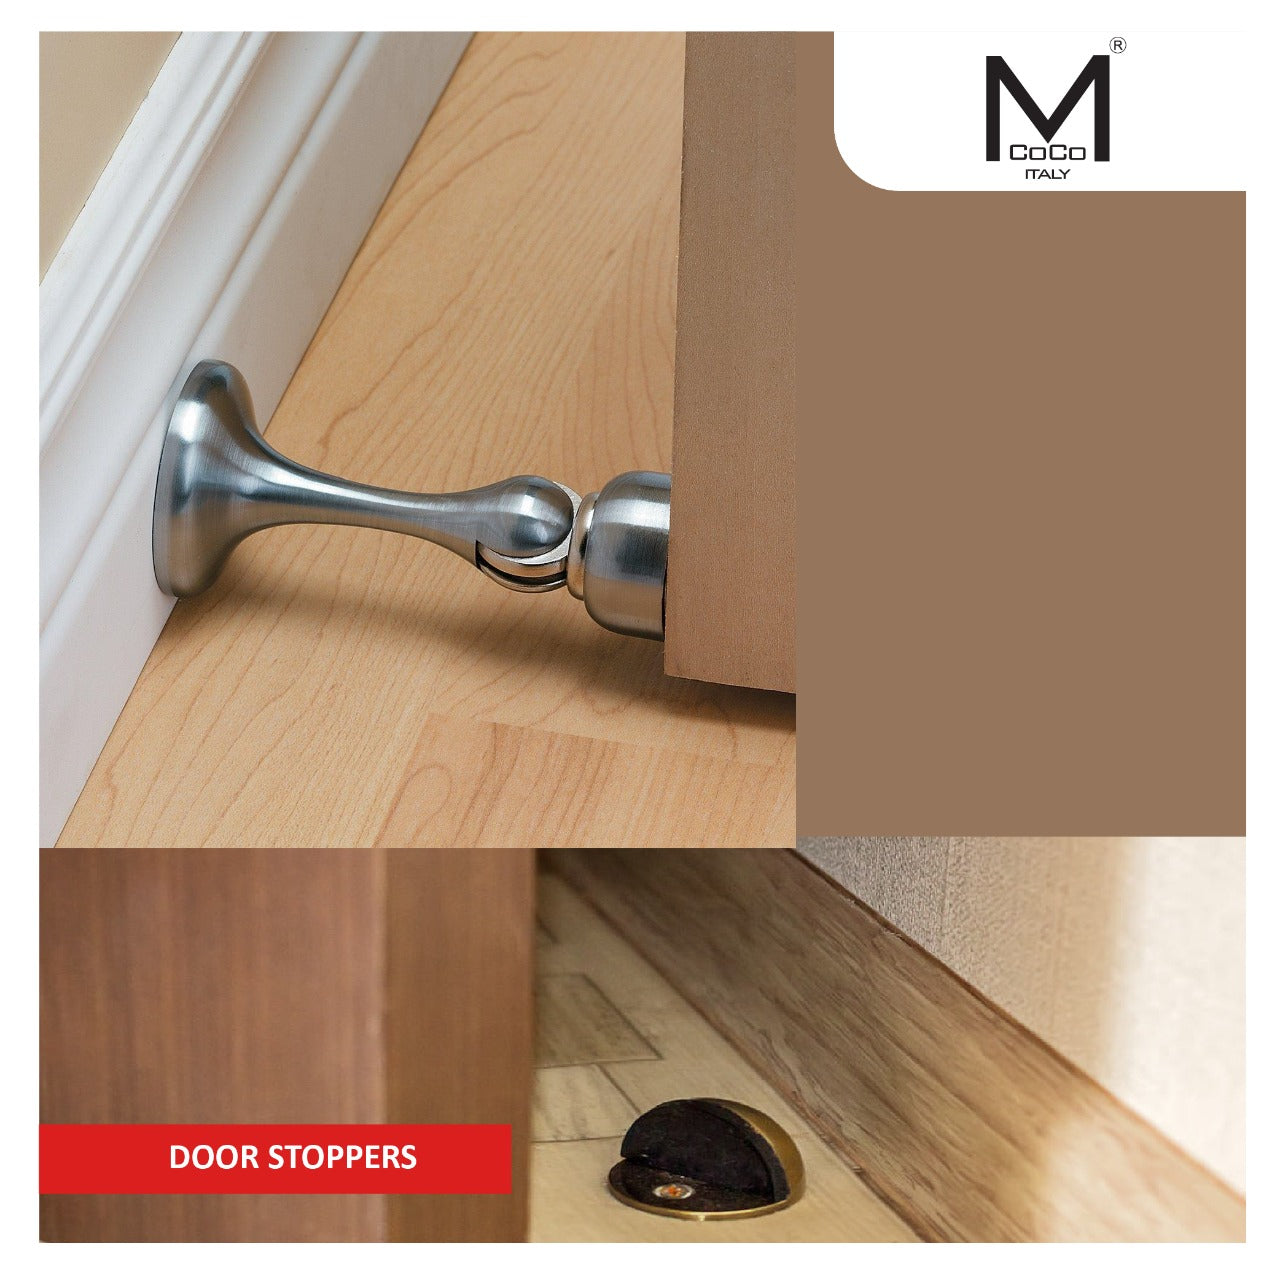 Reliable and functional Mcoco Door Stoppers by M. M. Noorbhoy & Co - High-quality stoppers to prevent damage and ensure safety.